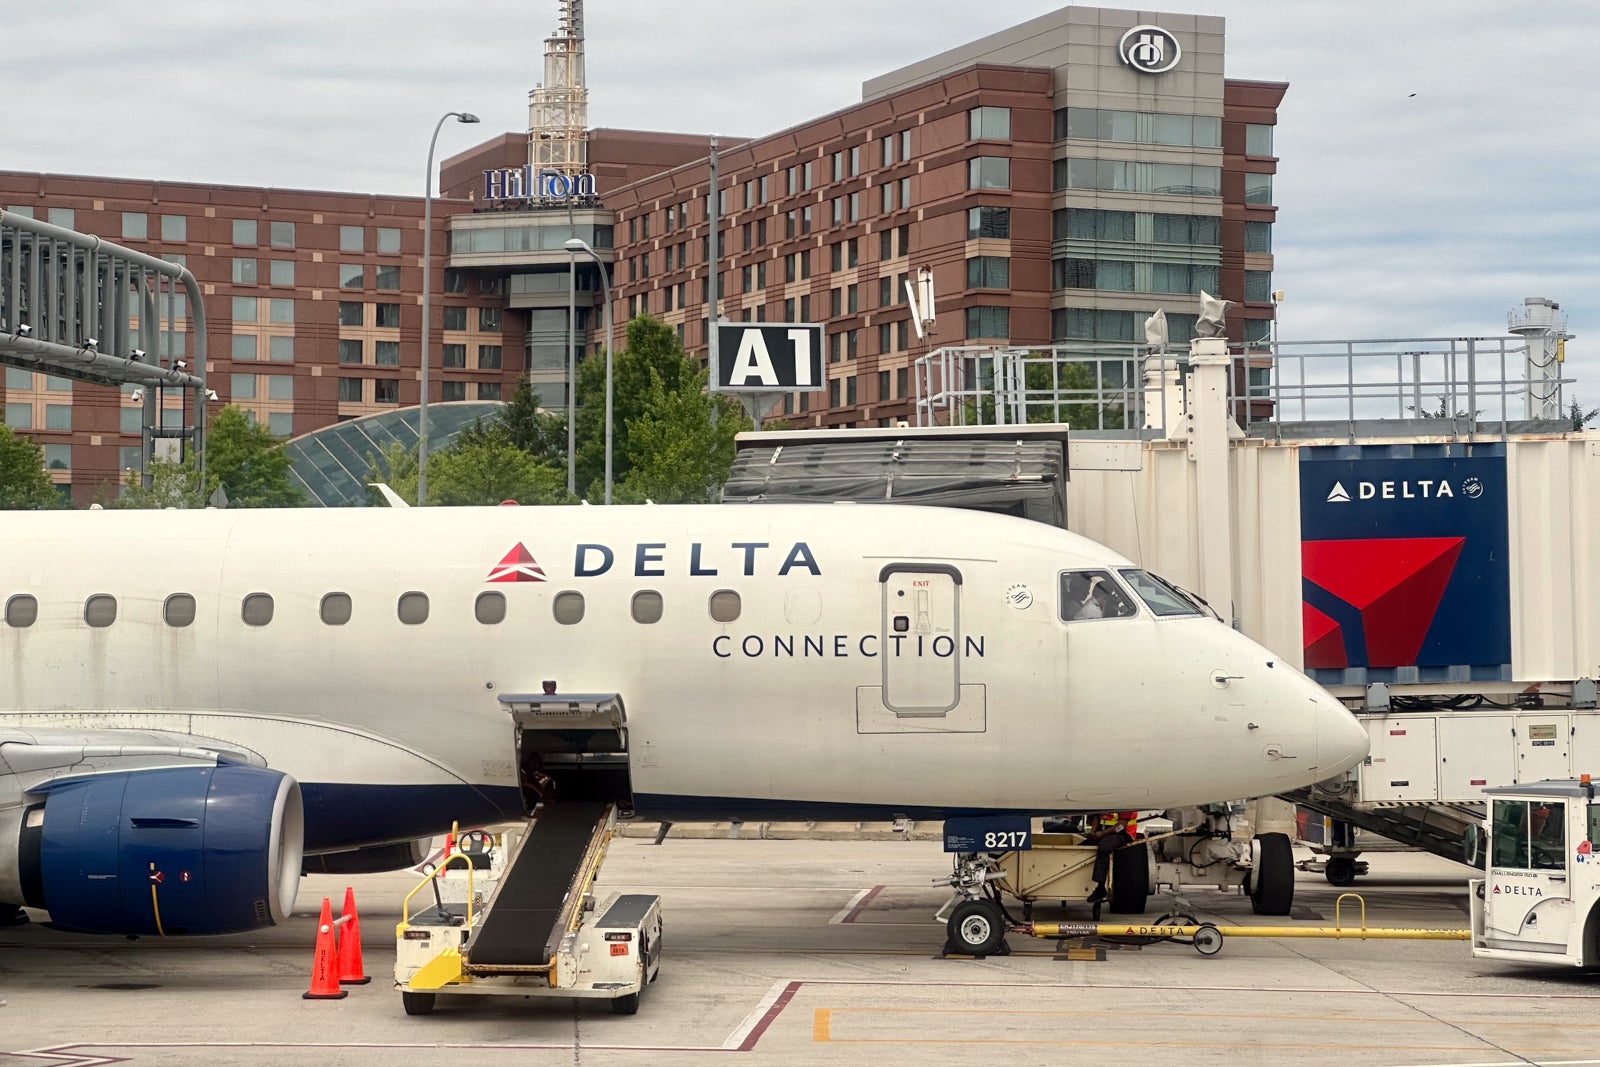 Delta plane at gate with hotel behind